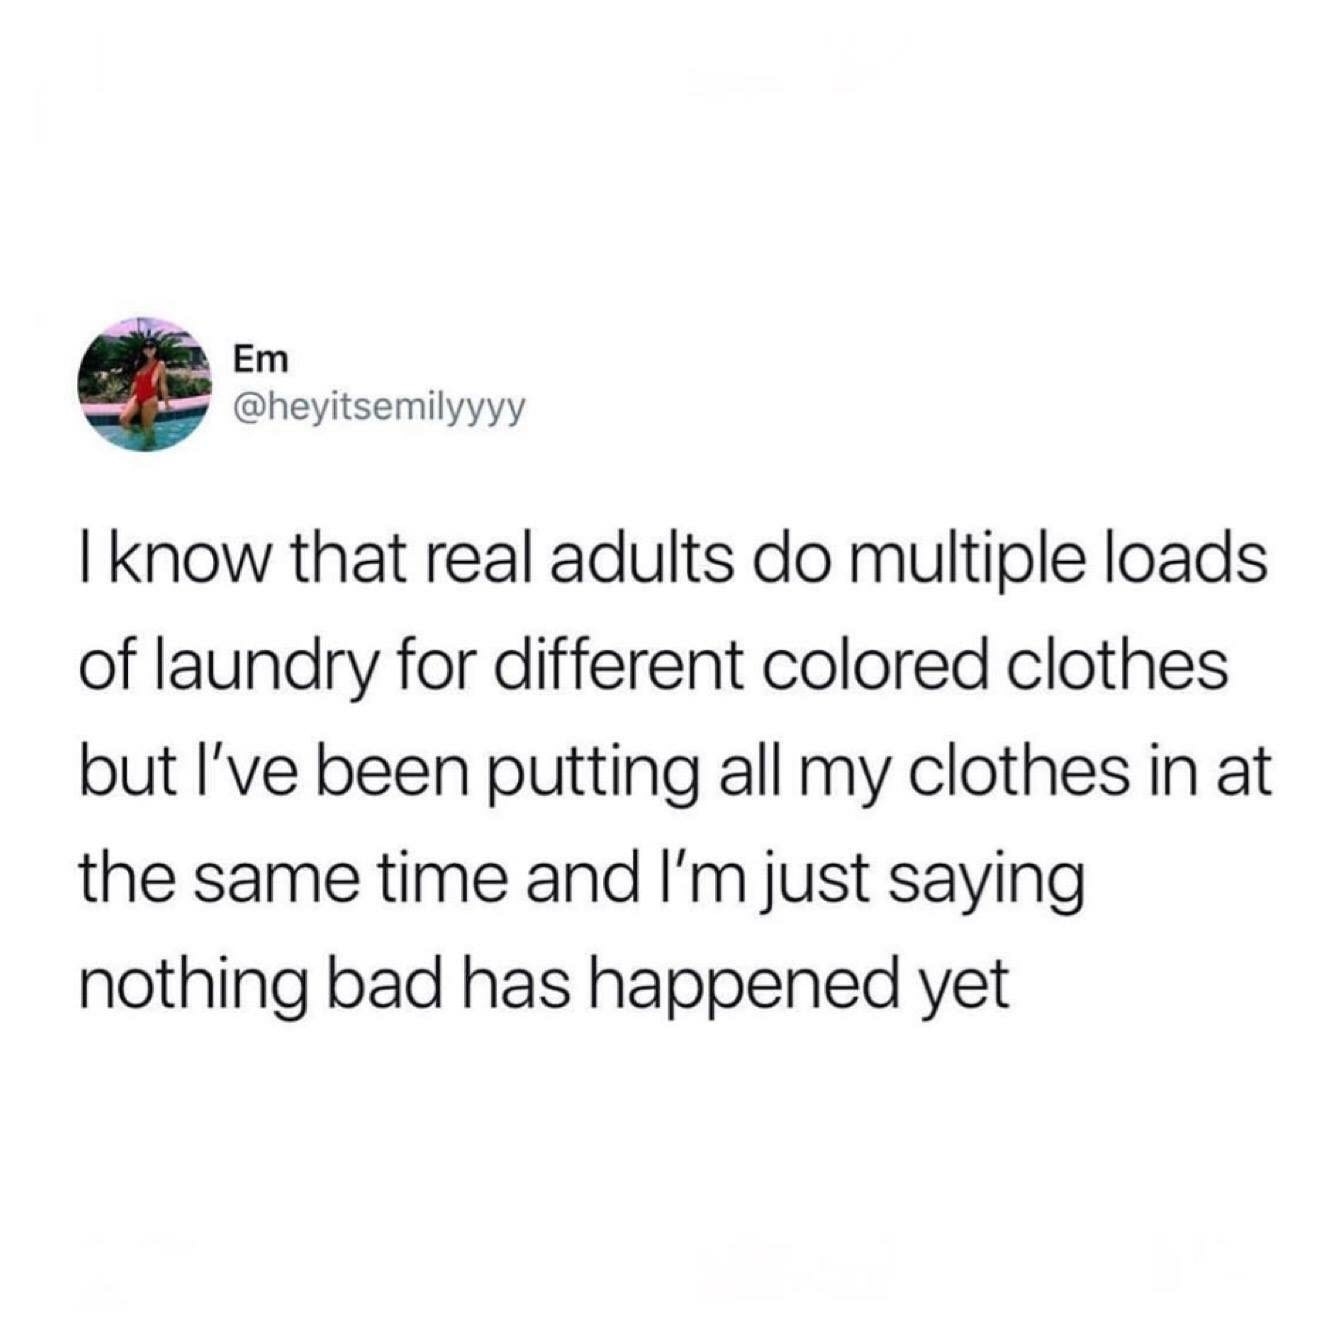 point - Em I know that real adults do multiple loads of laundry for different colored clothes but I've been putting all my clothes in at the same time and I'm just saying nothing bad has happened yet